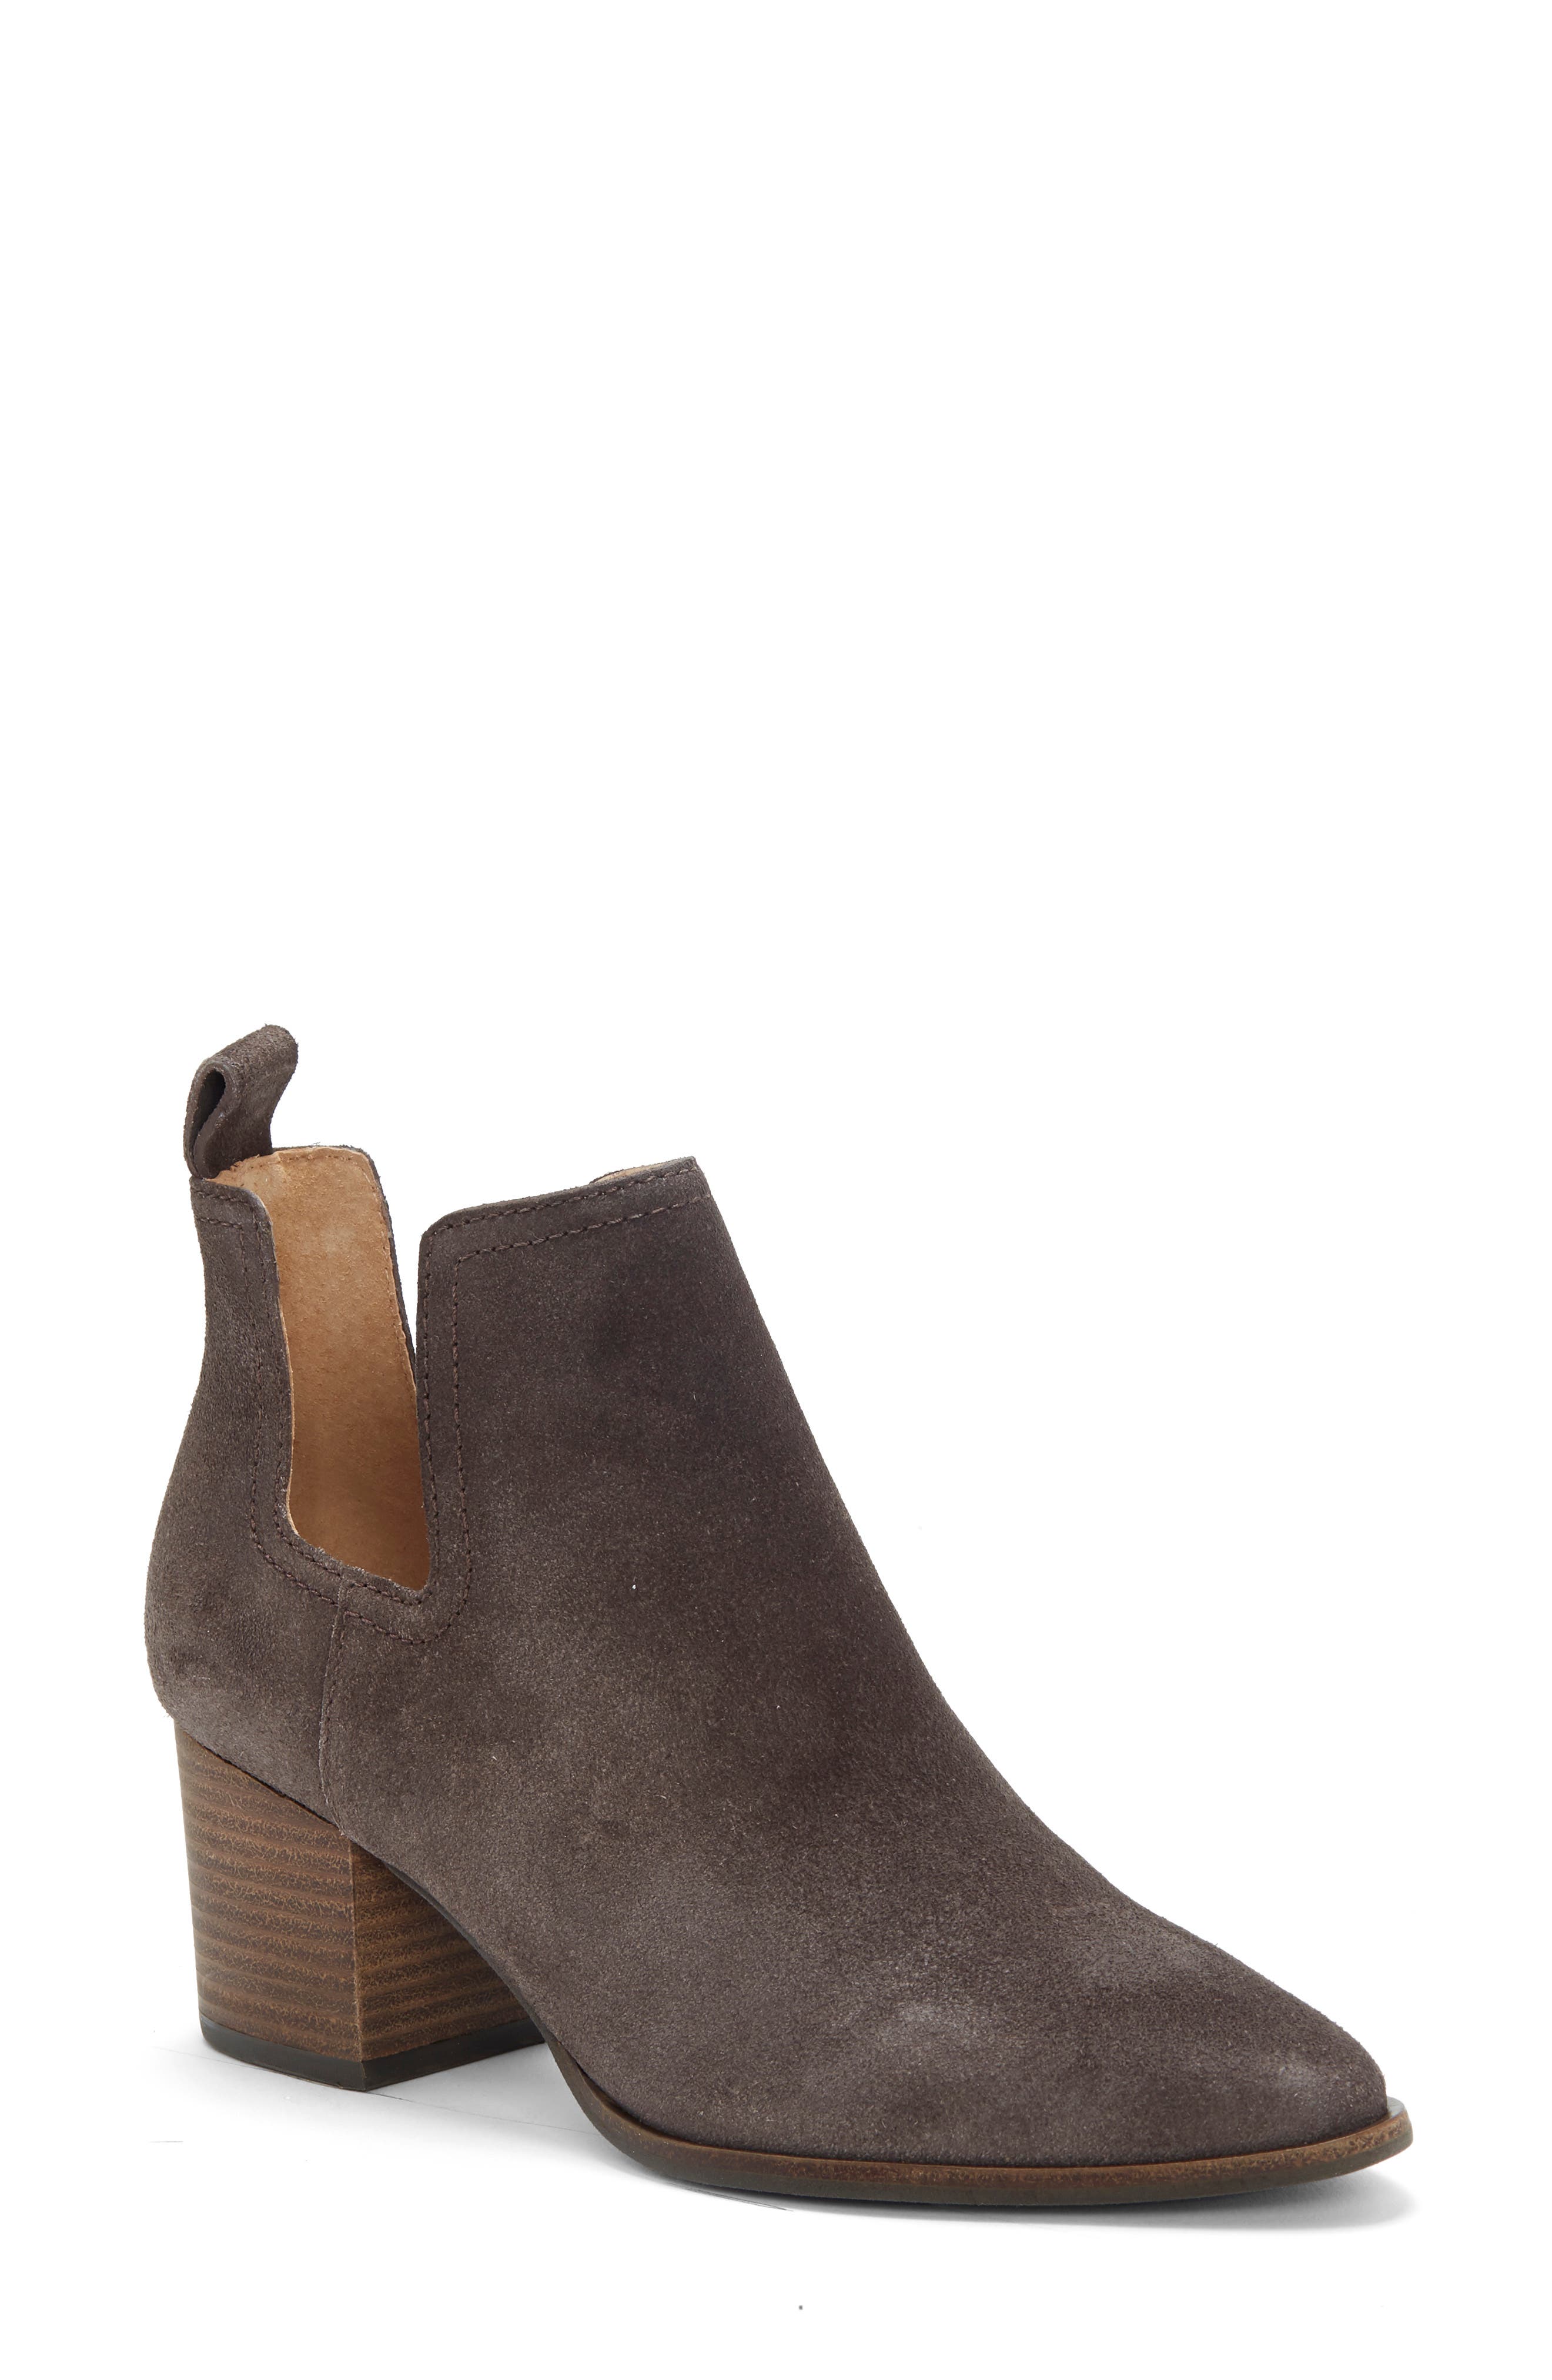 lucky brand women's ankle boots